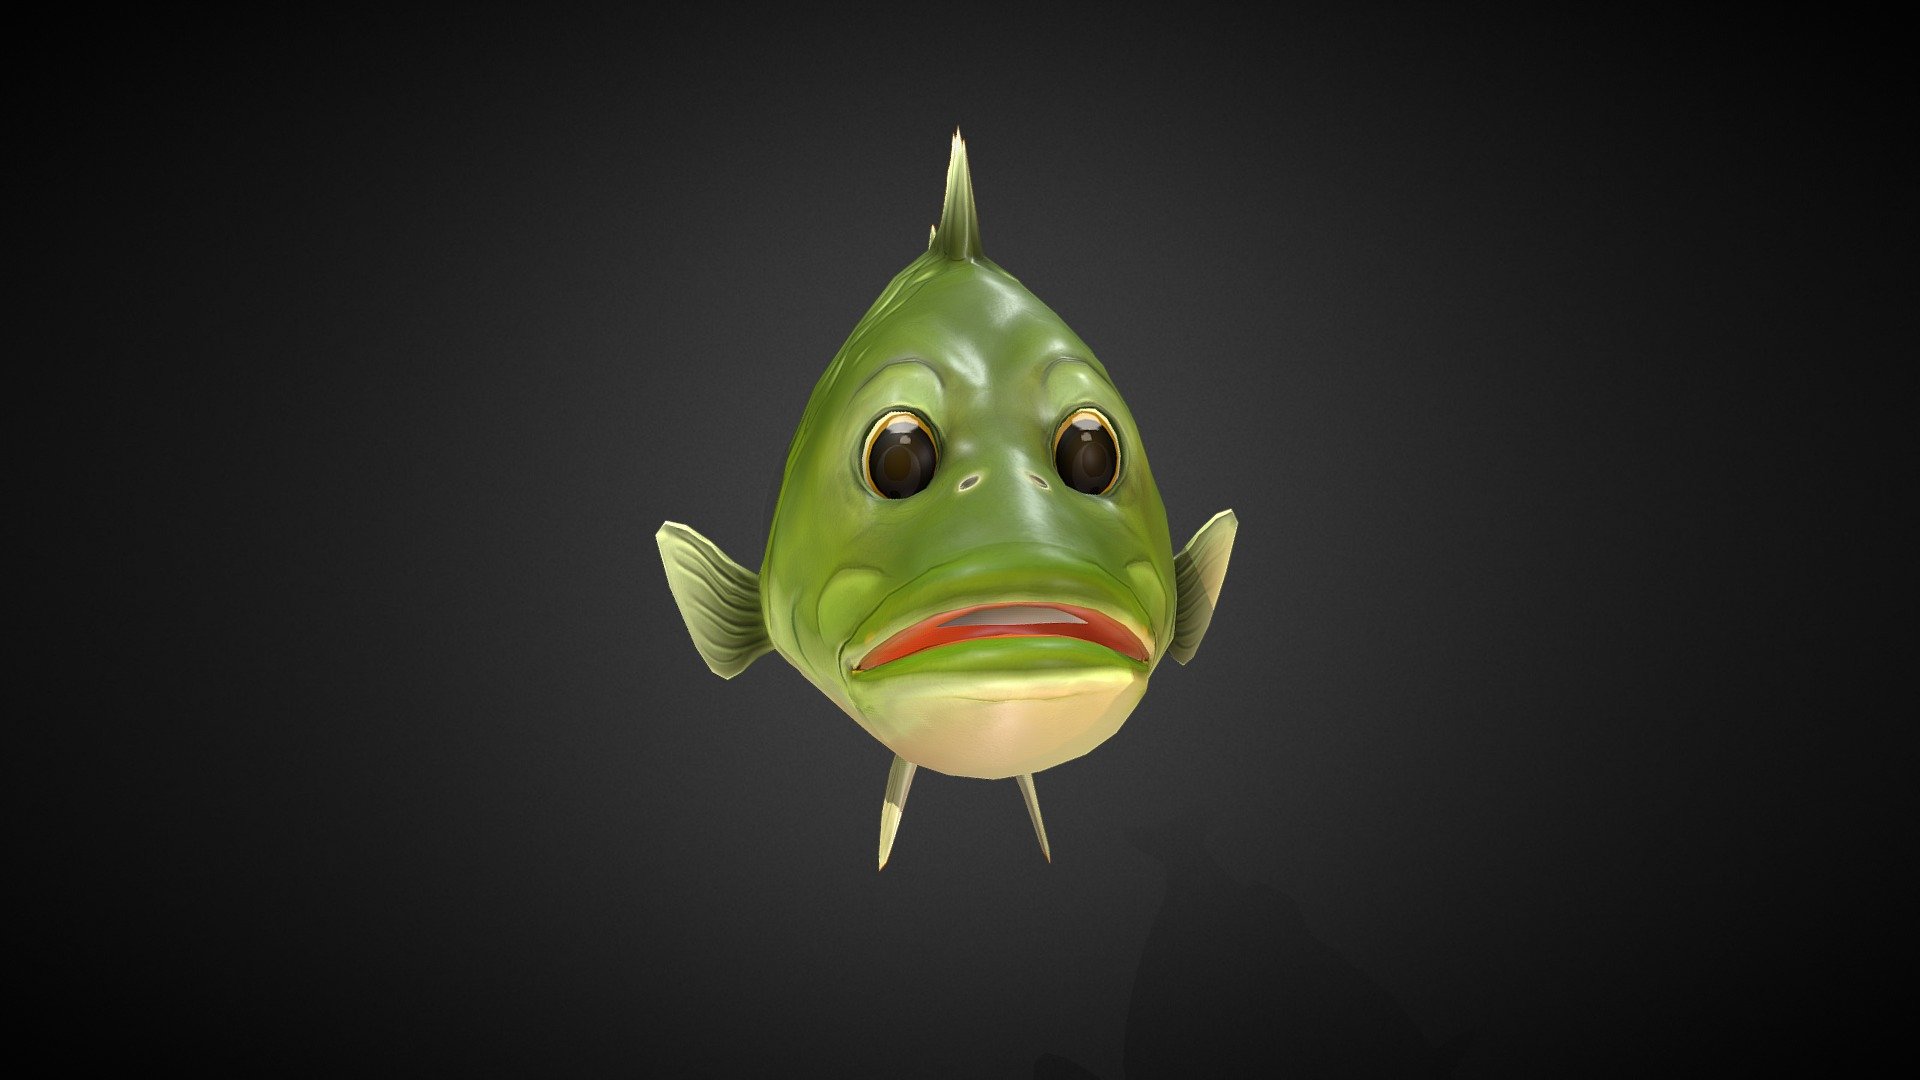 A fish created in toon style based similar to Disney movies 3d model